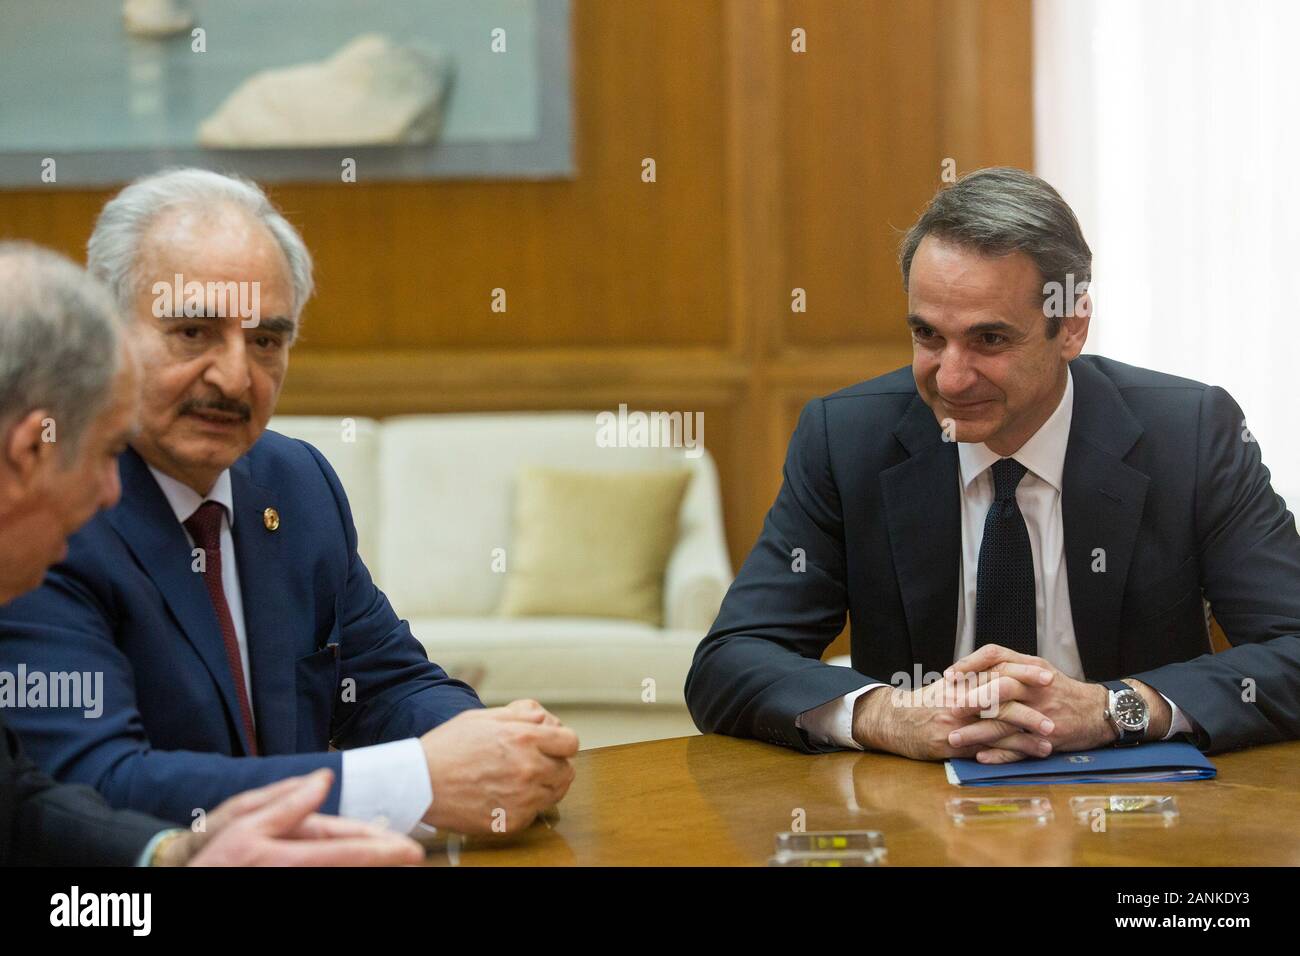 Athens, Greece. 17th Jan, 2020. Greek Prime Minister Kyriakos Mitsotakis (1st R) meets with Khalifa Haftar (2nd R), commander of the Libyan National Army (LNA), in Athens, Greece, on Jan. 17, 2020. Greece is ready to help Libya going forward once a solution is found to the conflict there, Greek Foreign Minister Nikos Dendias told the press here on Friday following his meeting with Khalifa Haftar, commander of the Libyan National Army (LNA). Credit: Marios Lolos/Xinhua/Alamy Live News Stock Photo